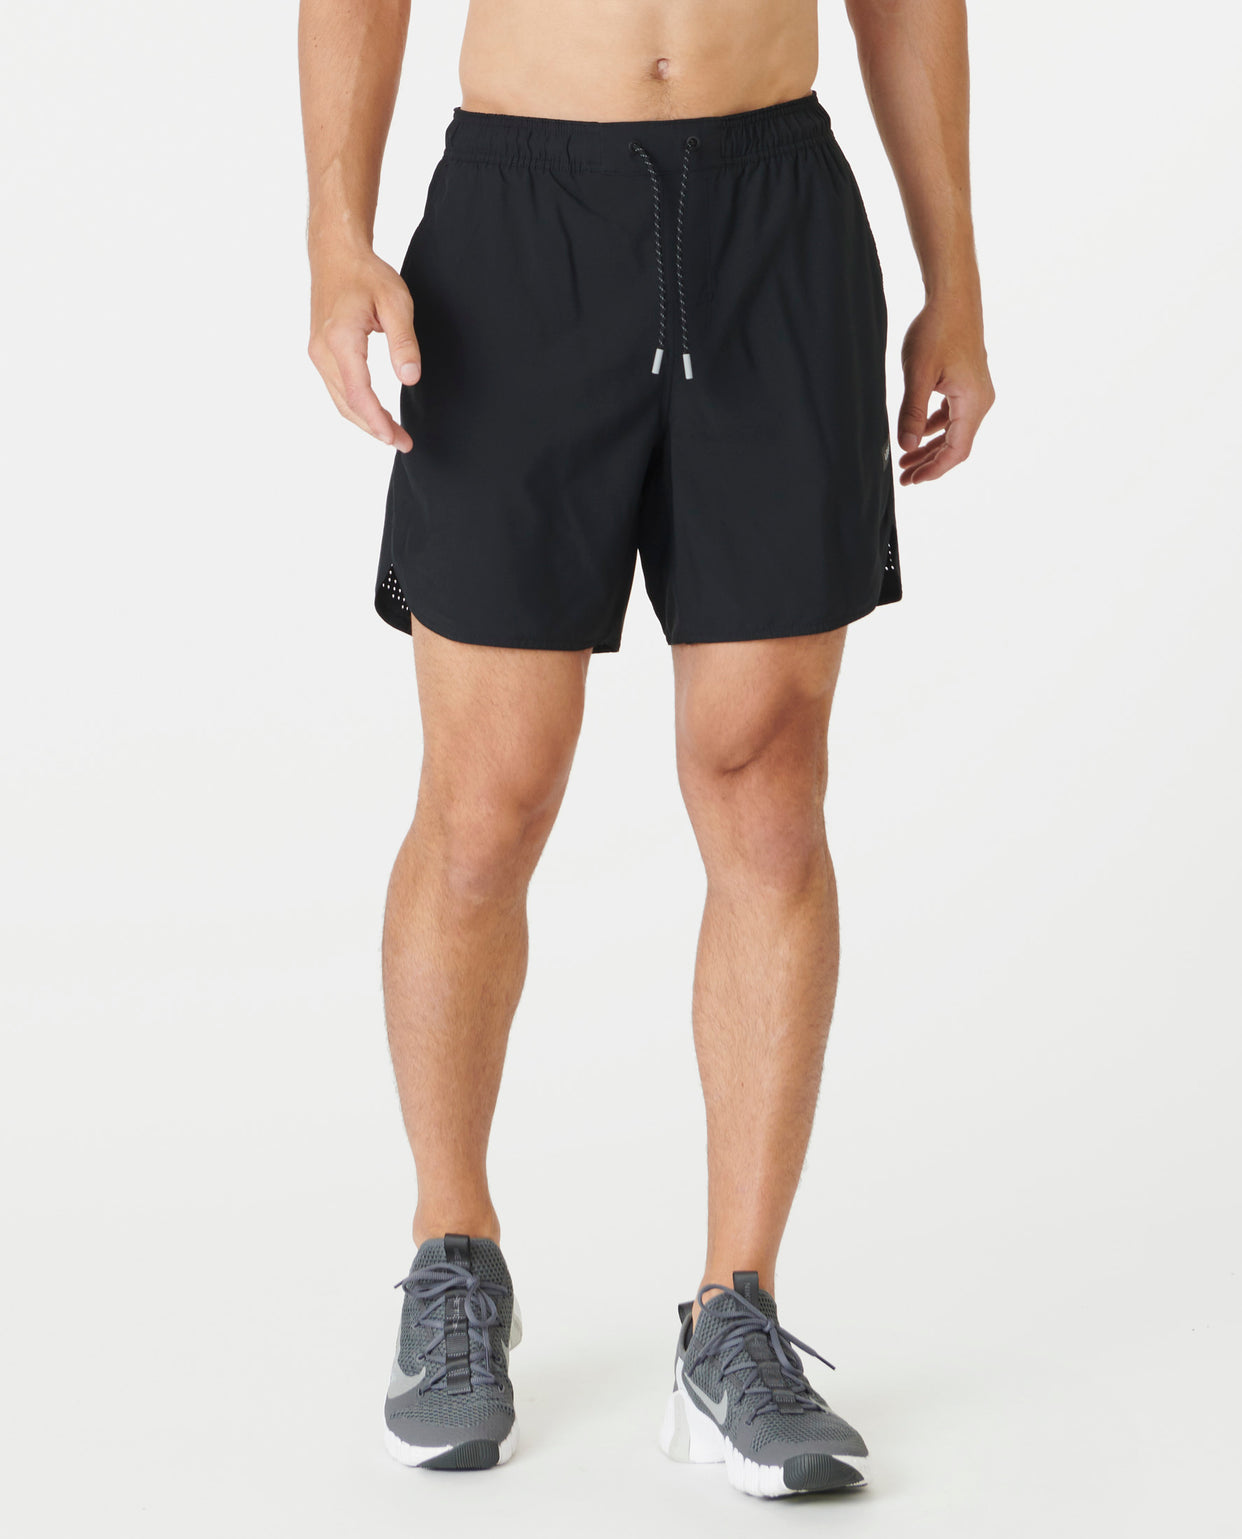 Legends Men's Luka 2.0 7-Inch Linerless Shorts, Black, Size: Small